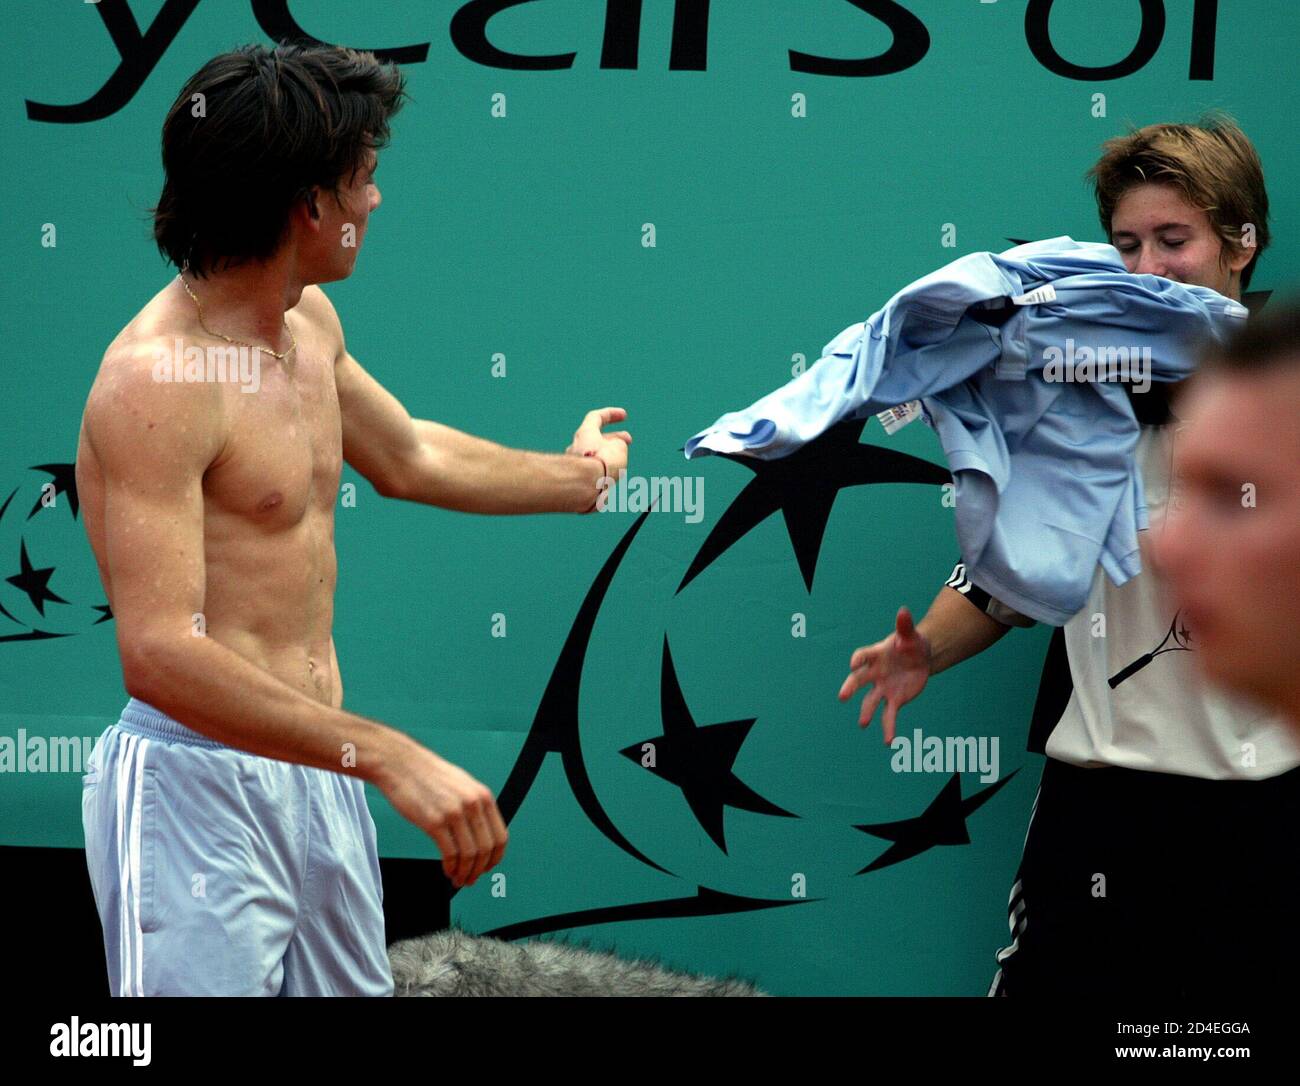 Guillermo Coria Of Argentina Gives His Shirt To Ballgirl During His Match Against Martin Verkerk Of The Netherlands In The Semi Final Of The French Open Stock Photo Alamy